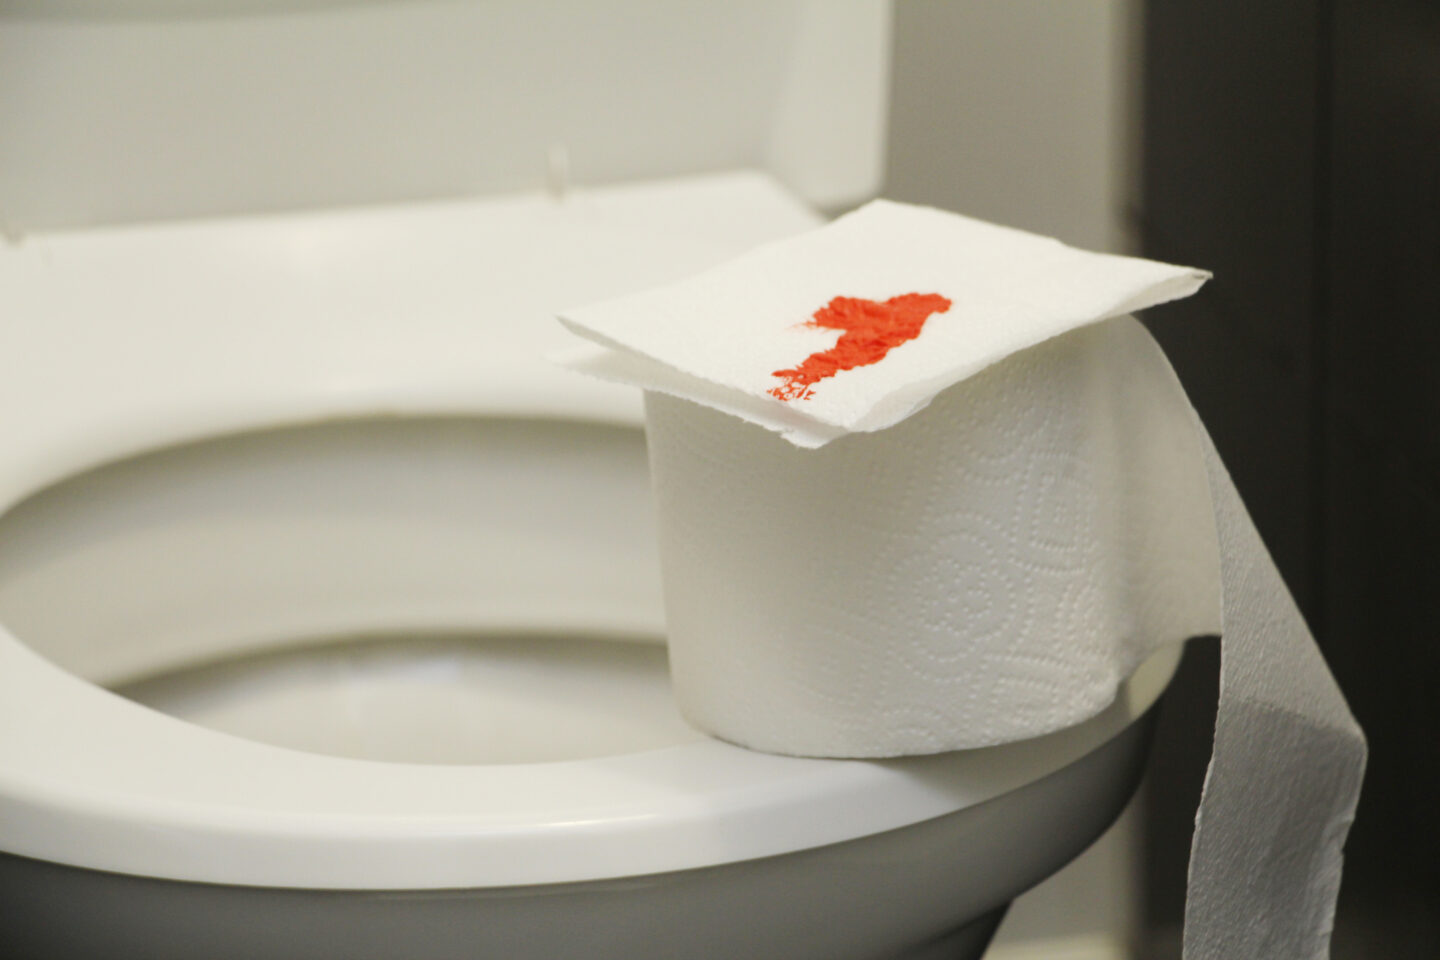 A roll of toilet paper with blood lies on the toilet, illustrating symptoms of rectal bleeding.